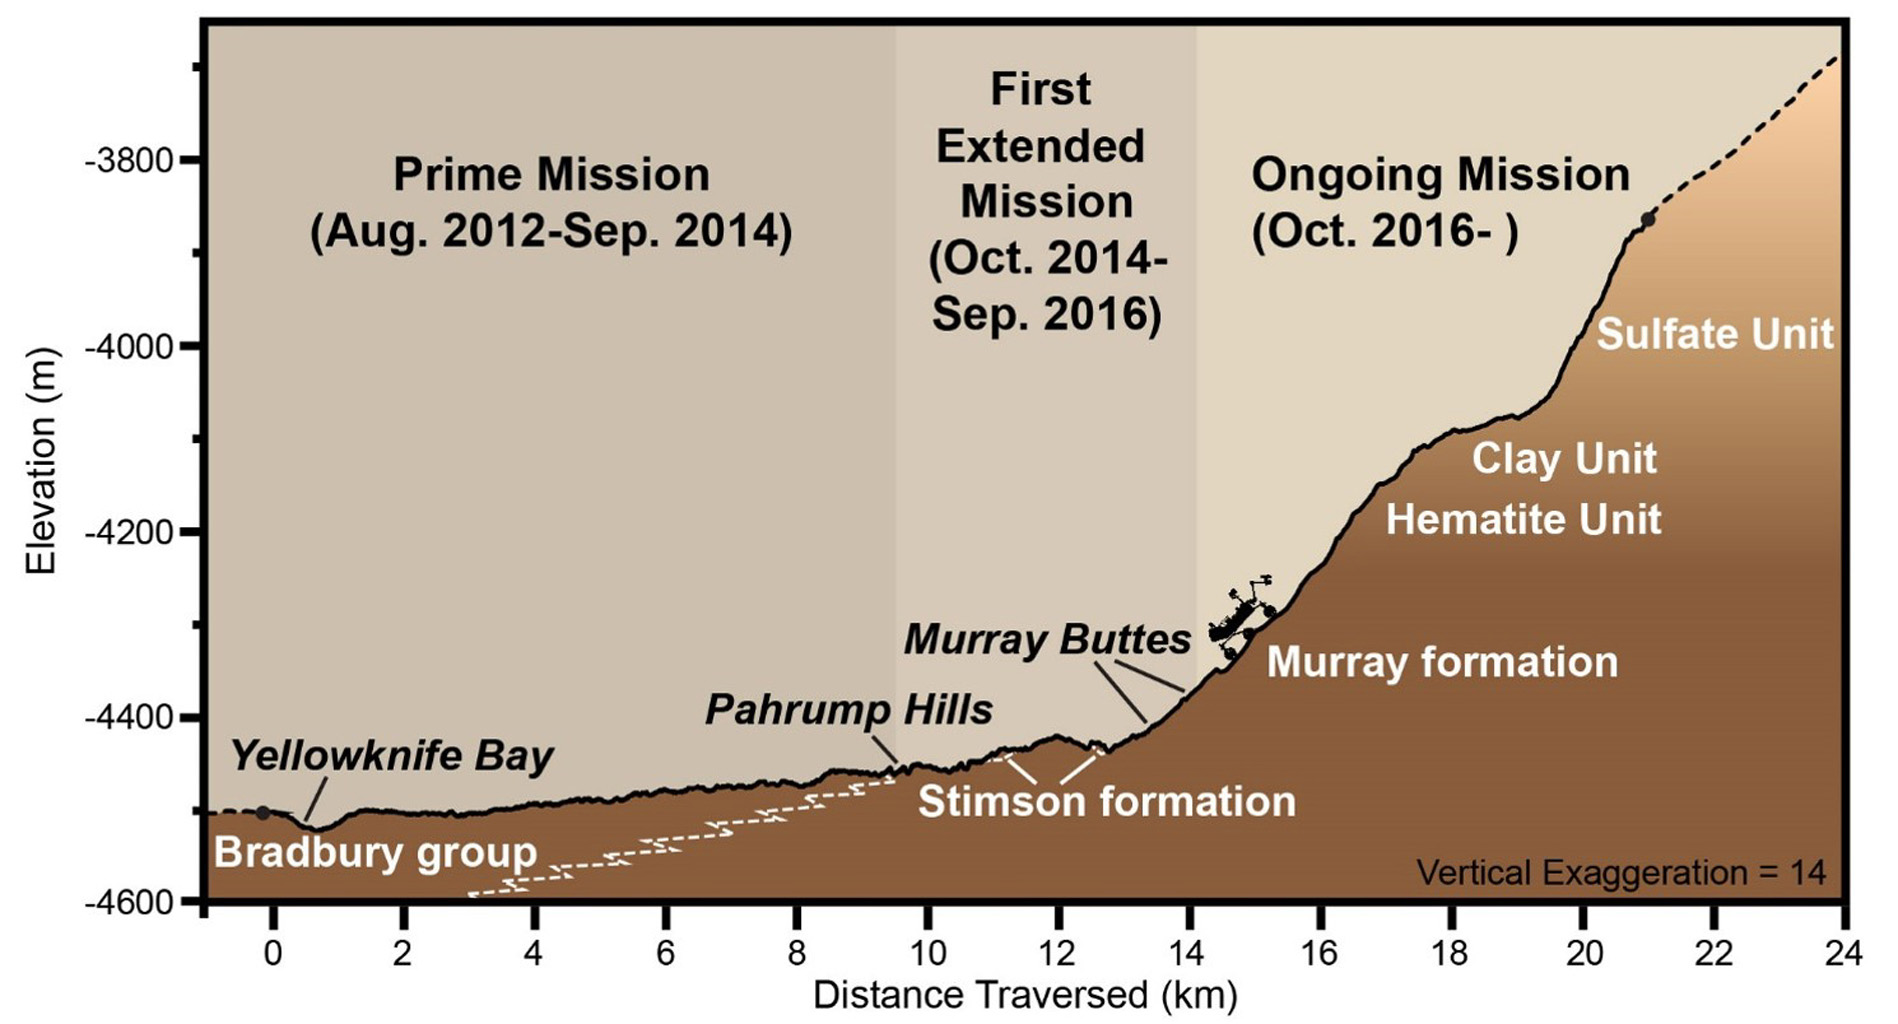 Illustration of Curiosity's mission so far with distance traveled and compositions of various rock formations. Image Credit: NASA/JPL-Caltech